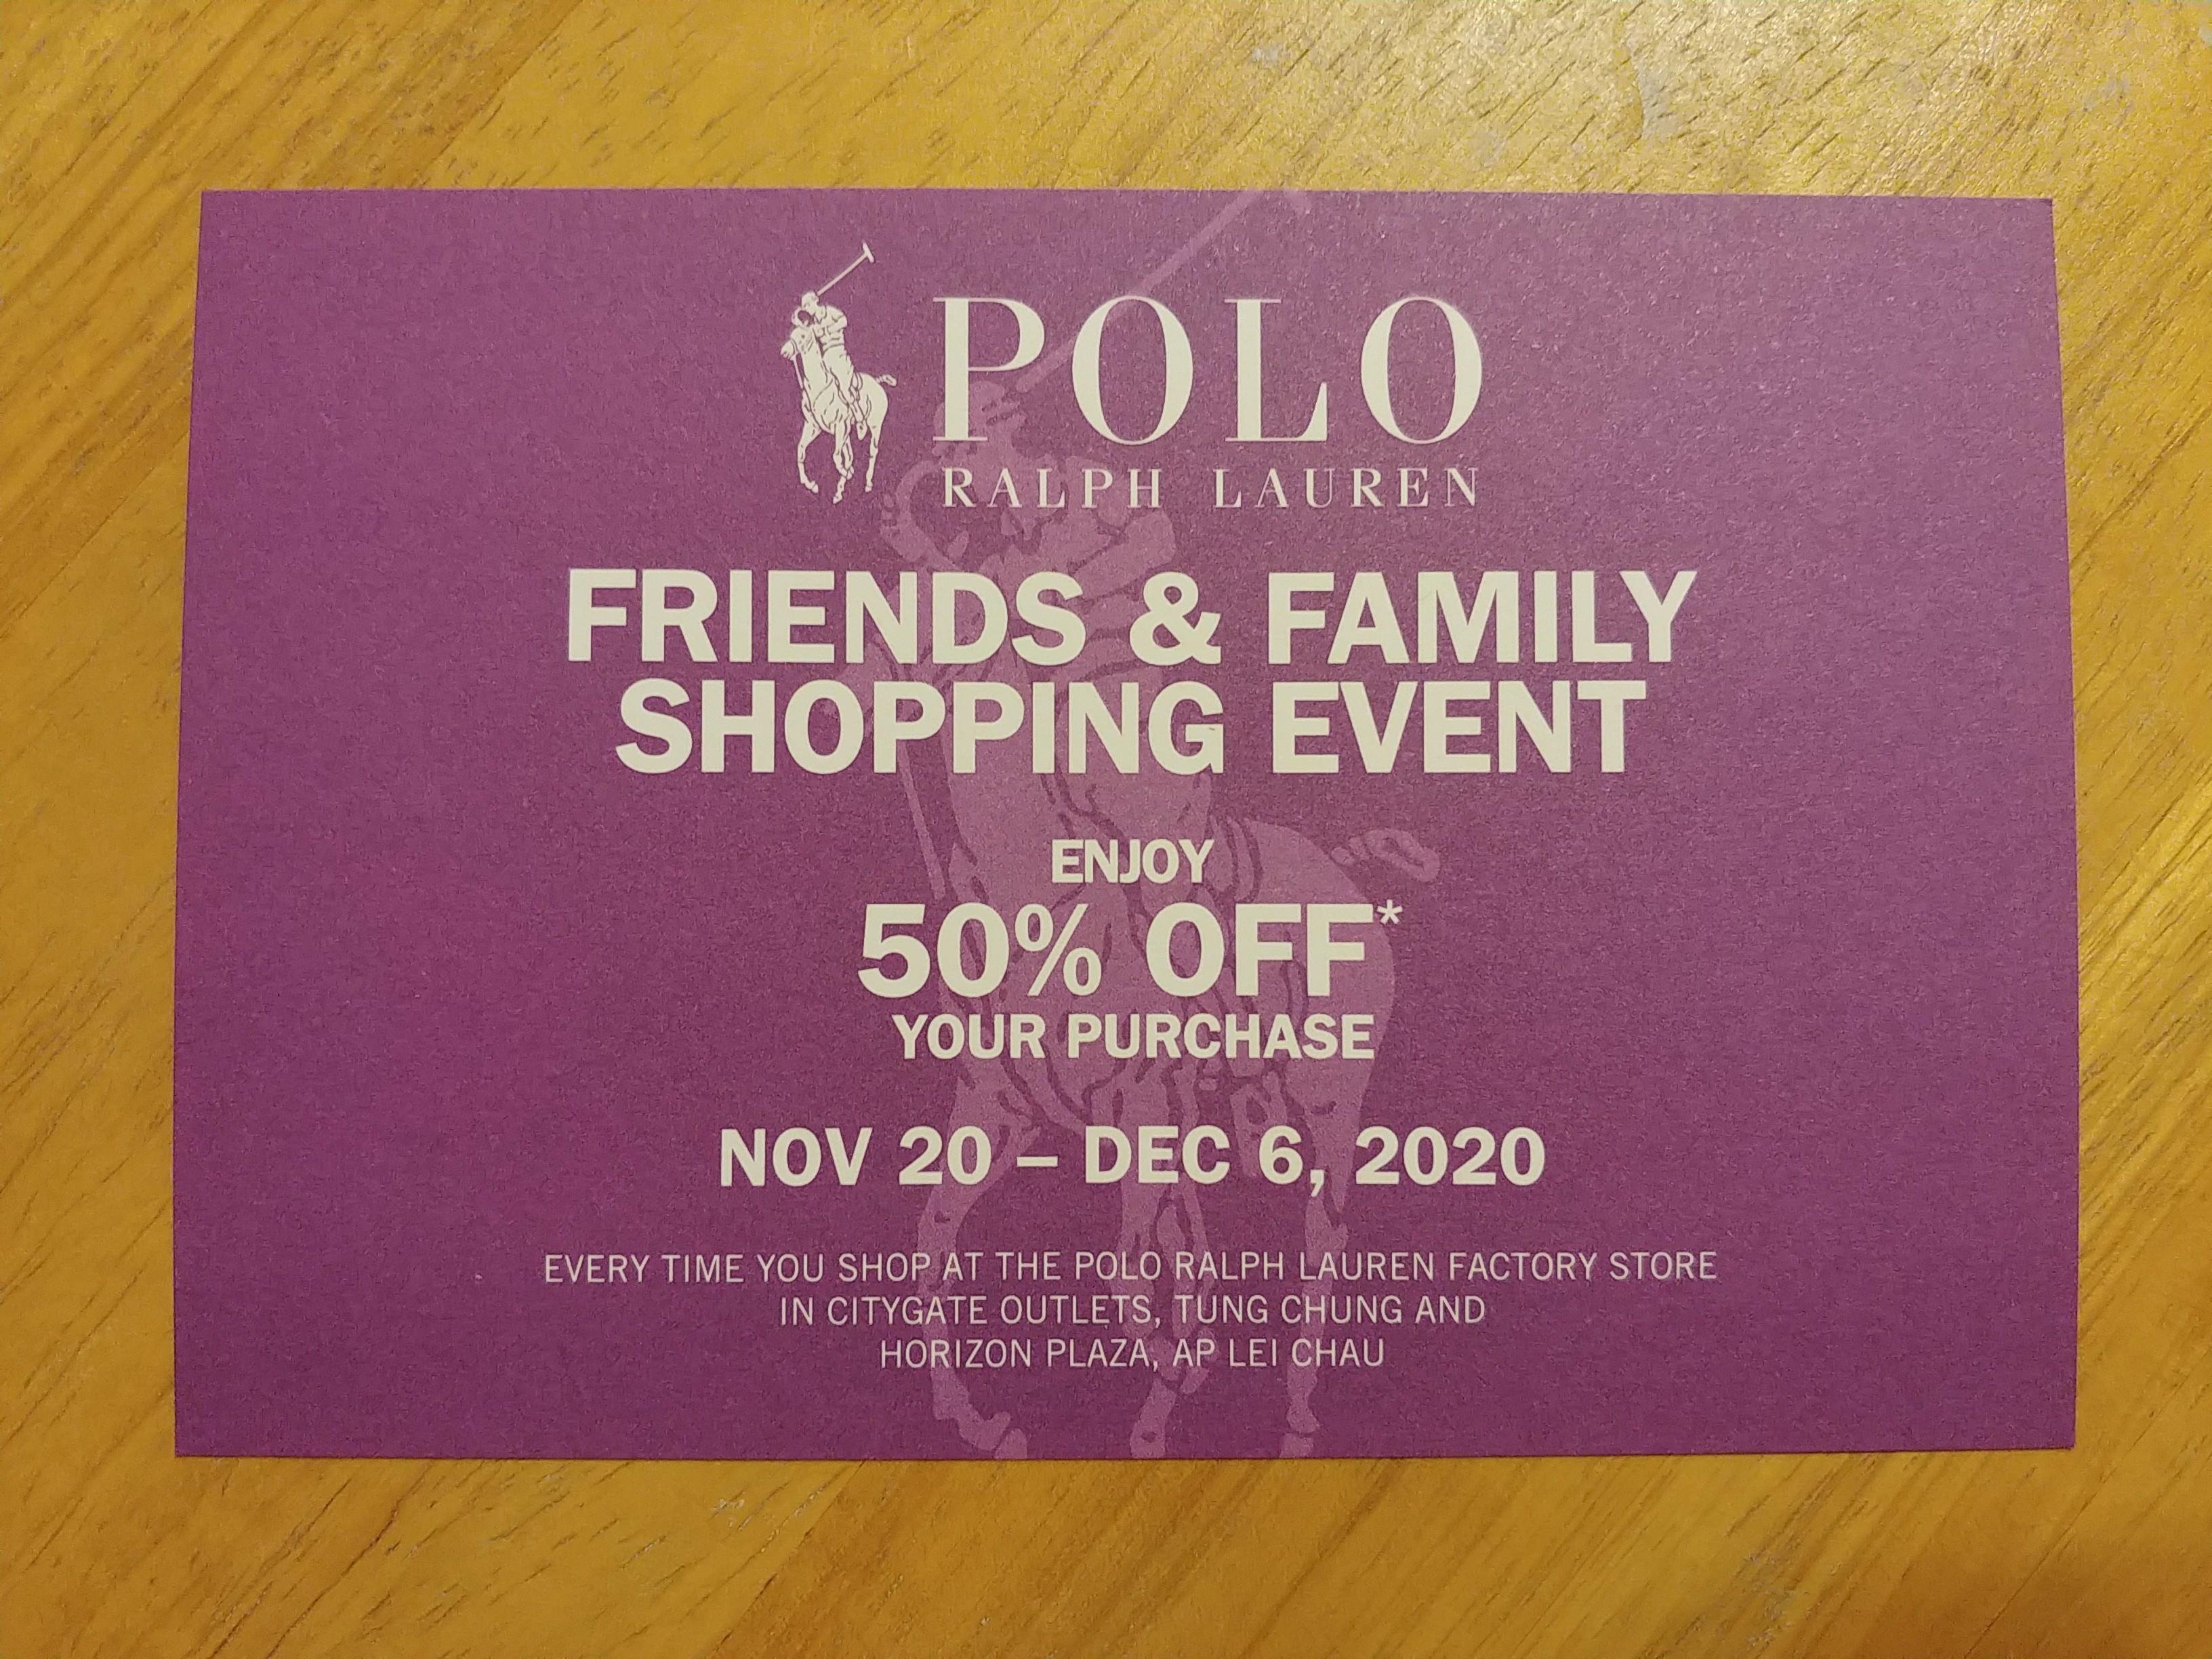 polo ralph lauren friends and family coupon